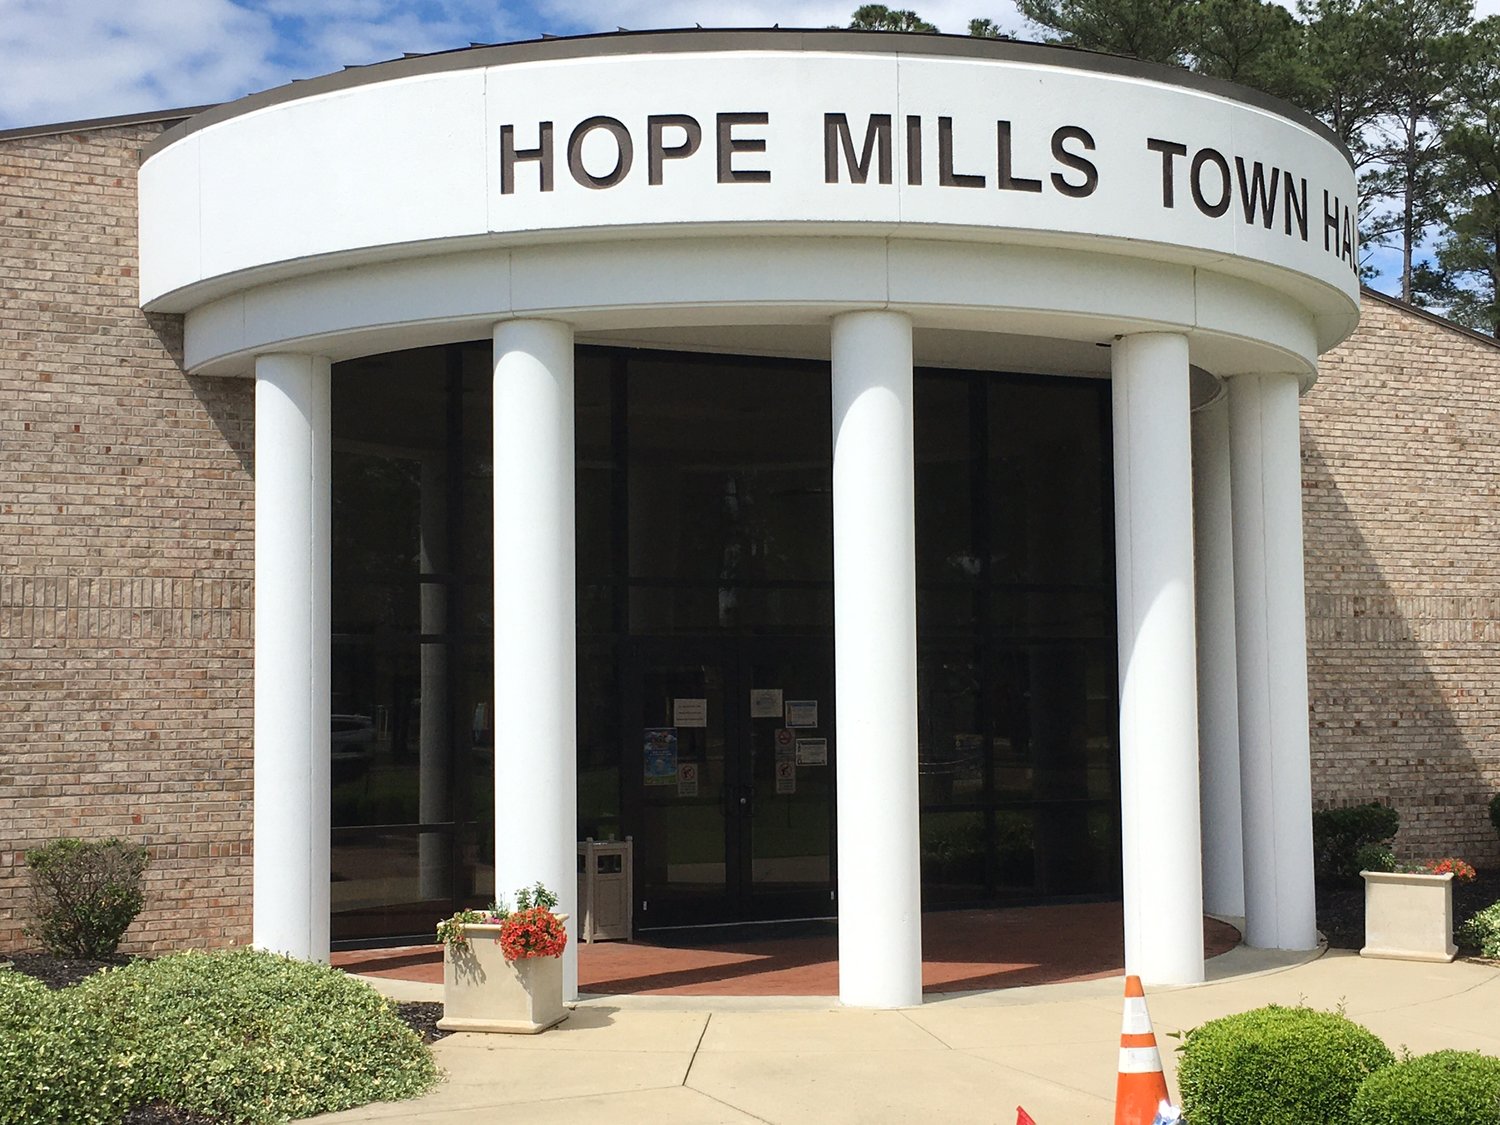 The Hope Mills Board of Commissioners voted Monday night to consider altering the terms served by the mayor and Board of Commissioners from two-year to four-year staggered terms.